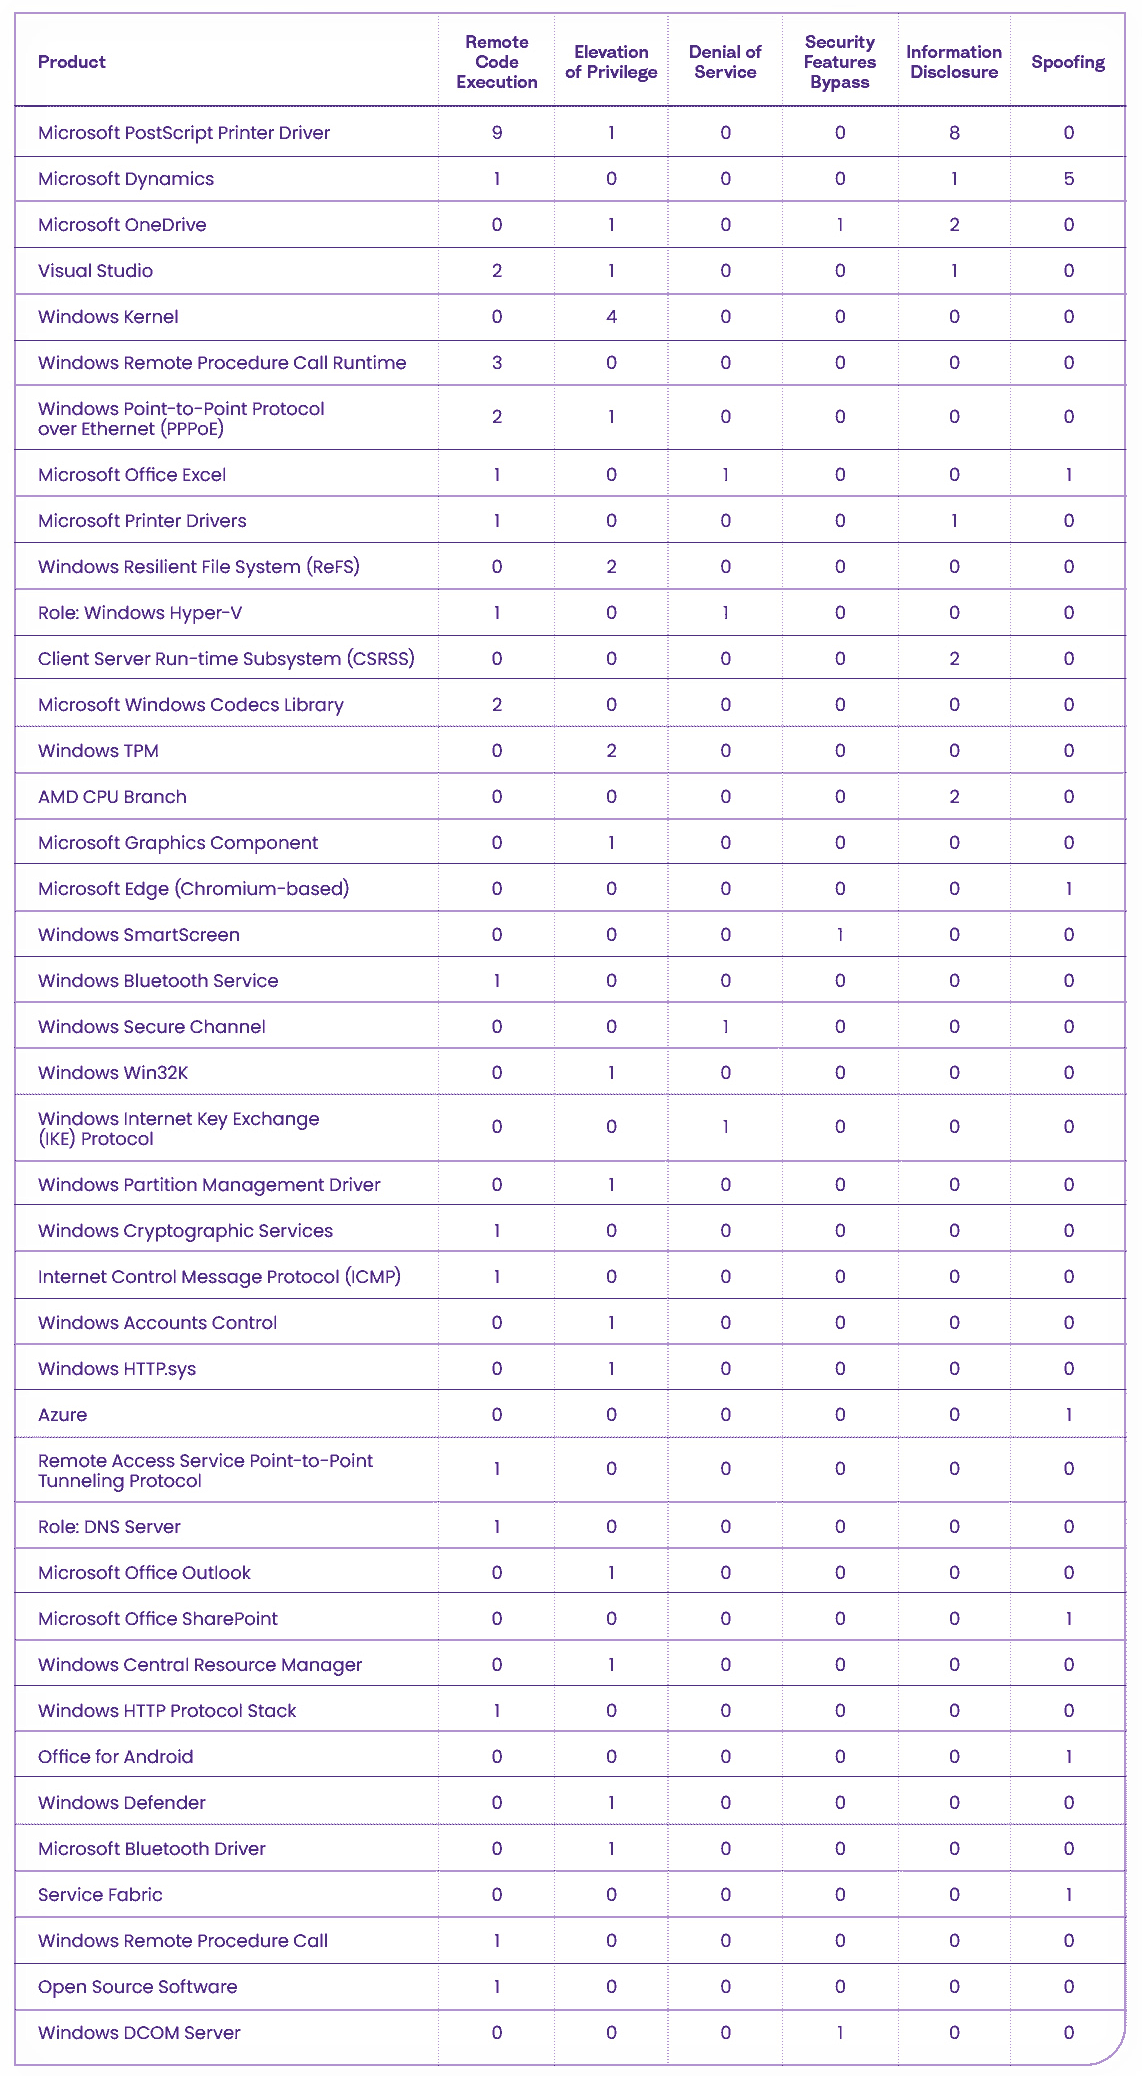 A table showing a breakdown of the affected software components, according to the type of vulnerability patched, in Microsoft's Patch Tuesday, March 2023 Security Update